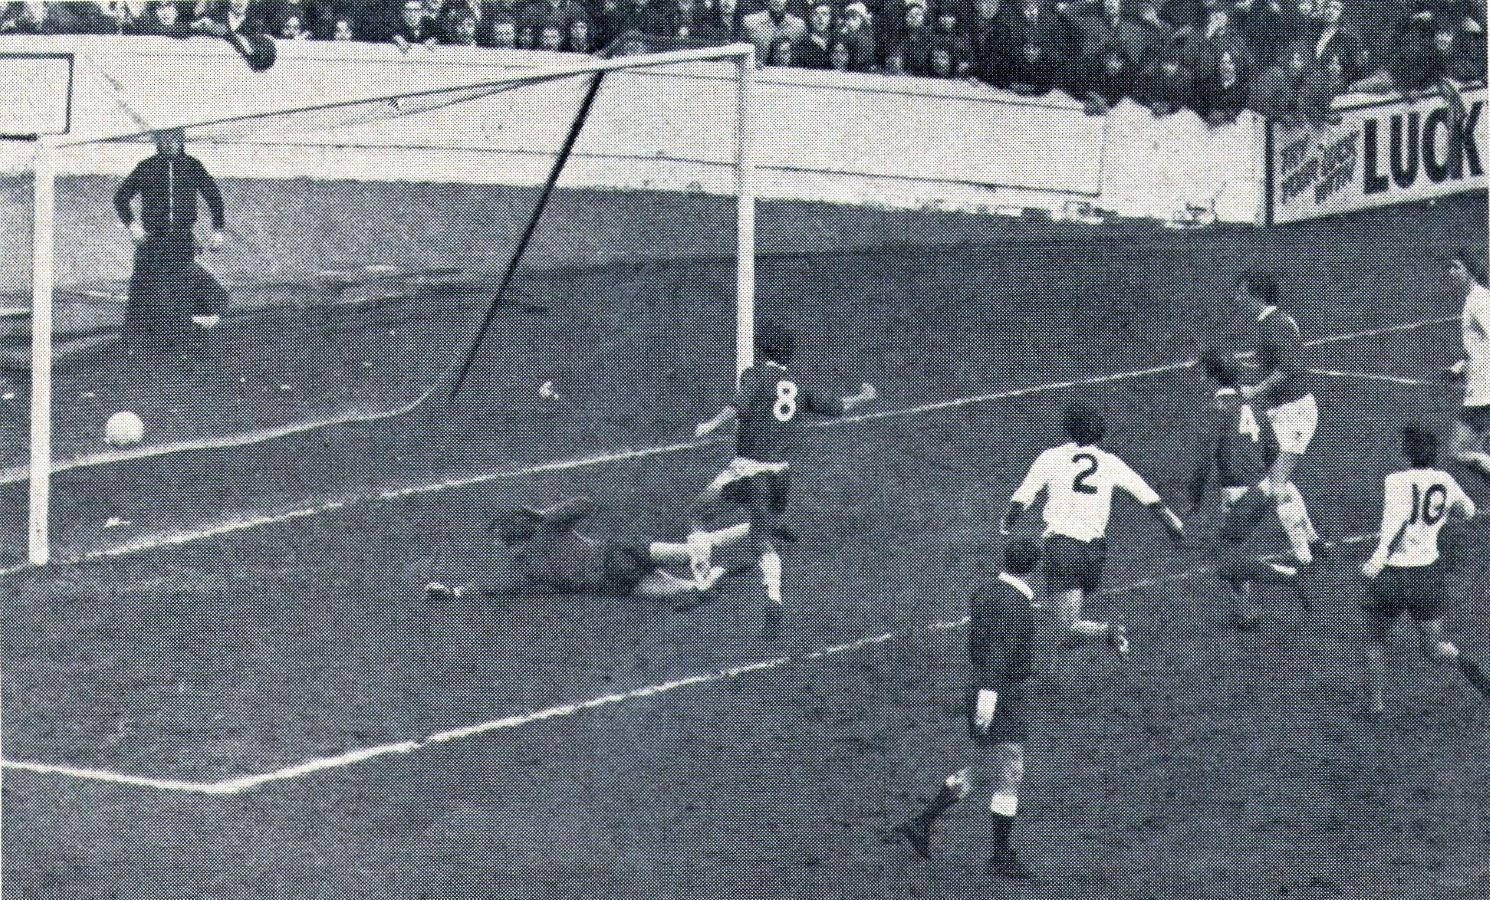 1818 01.03.72 Newton v Spurs (H) SECOND IN SEQUENCE - Henry Newton follows up to score after J...jpg